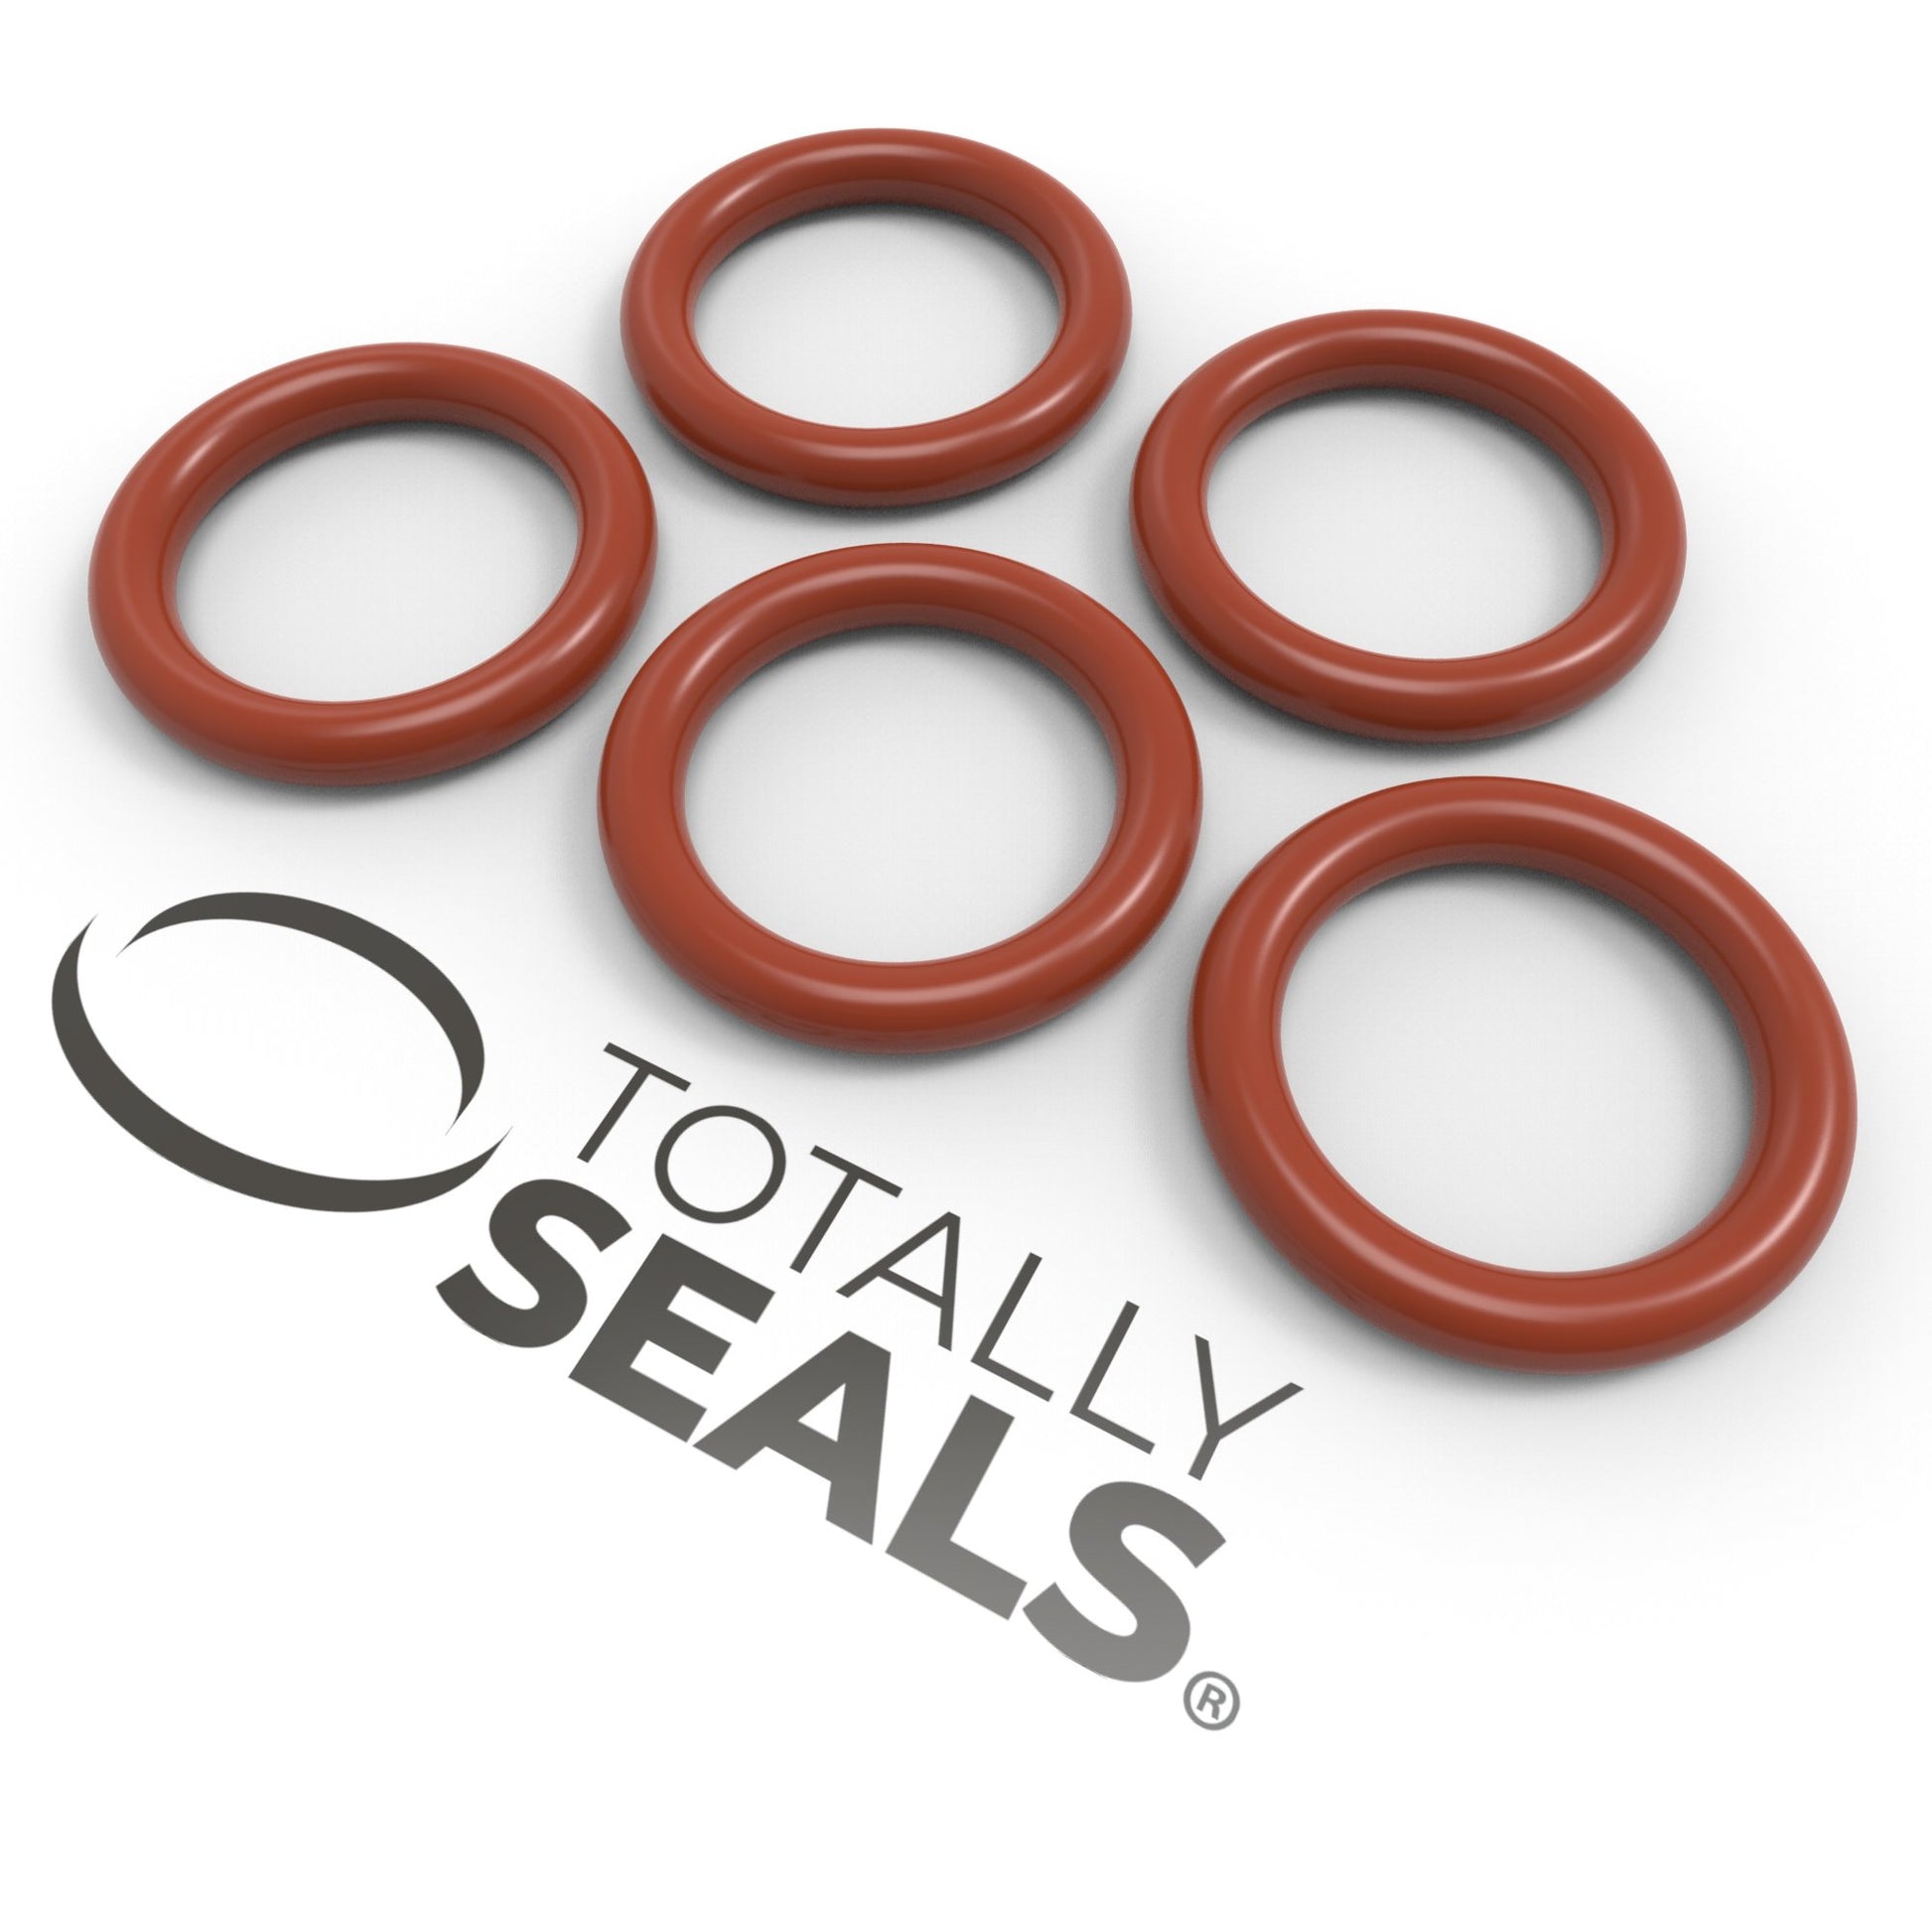 19mm x 3mm (25mm OD) Silicone O-Rings - Totally Seals®